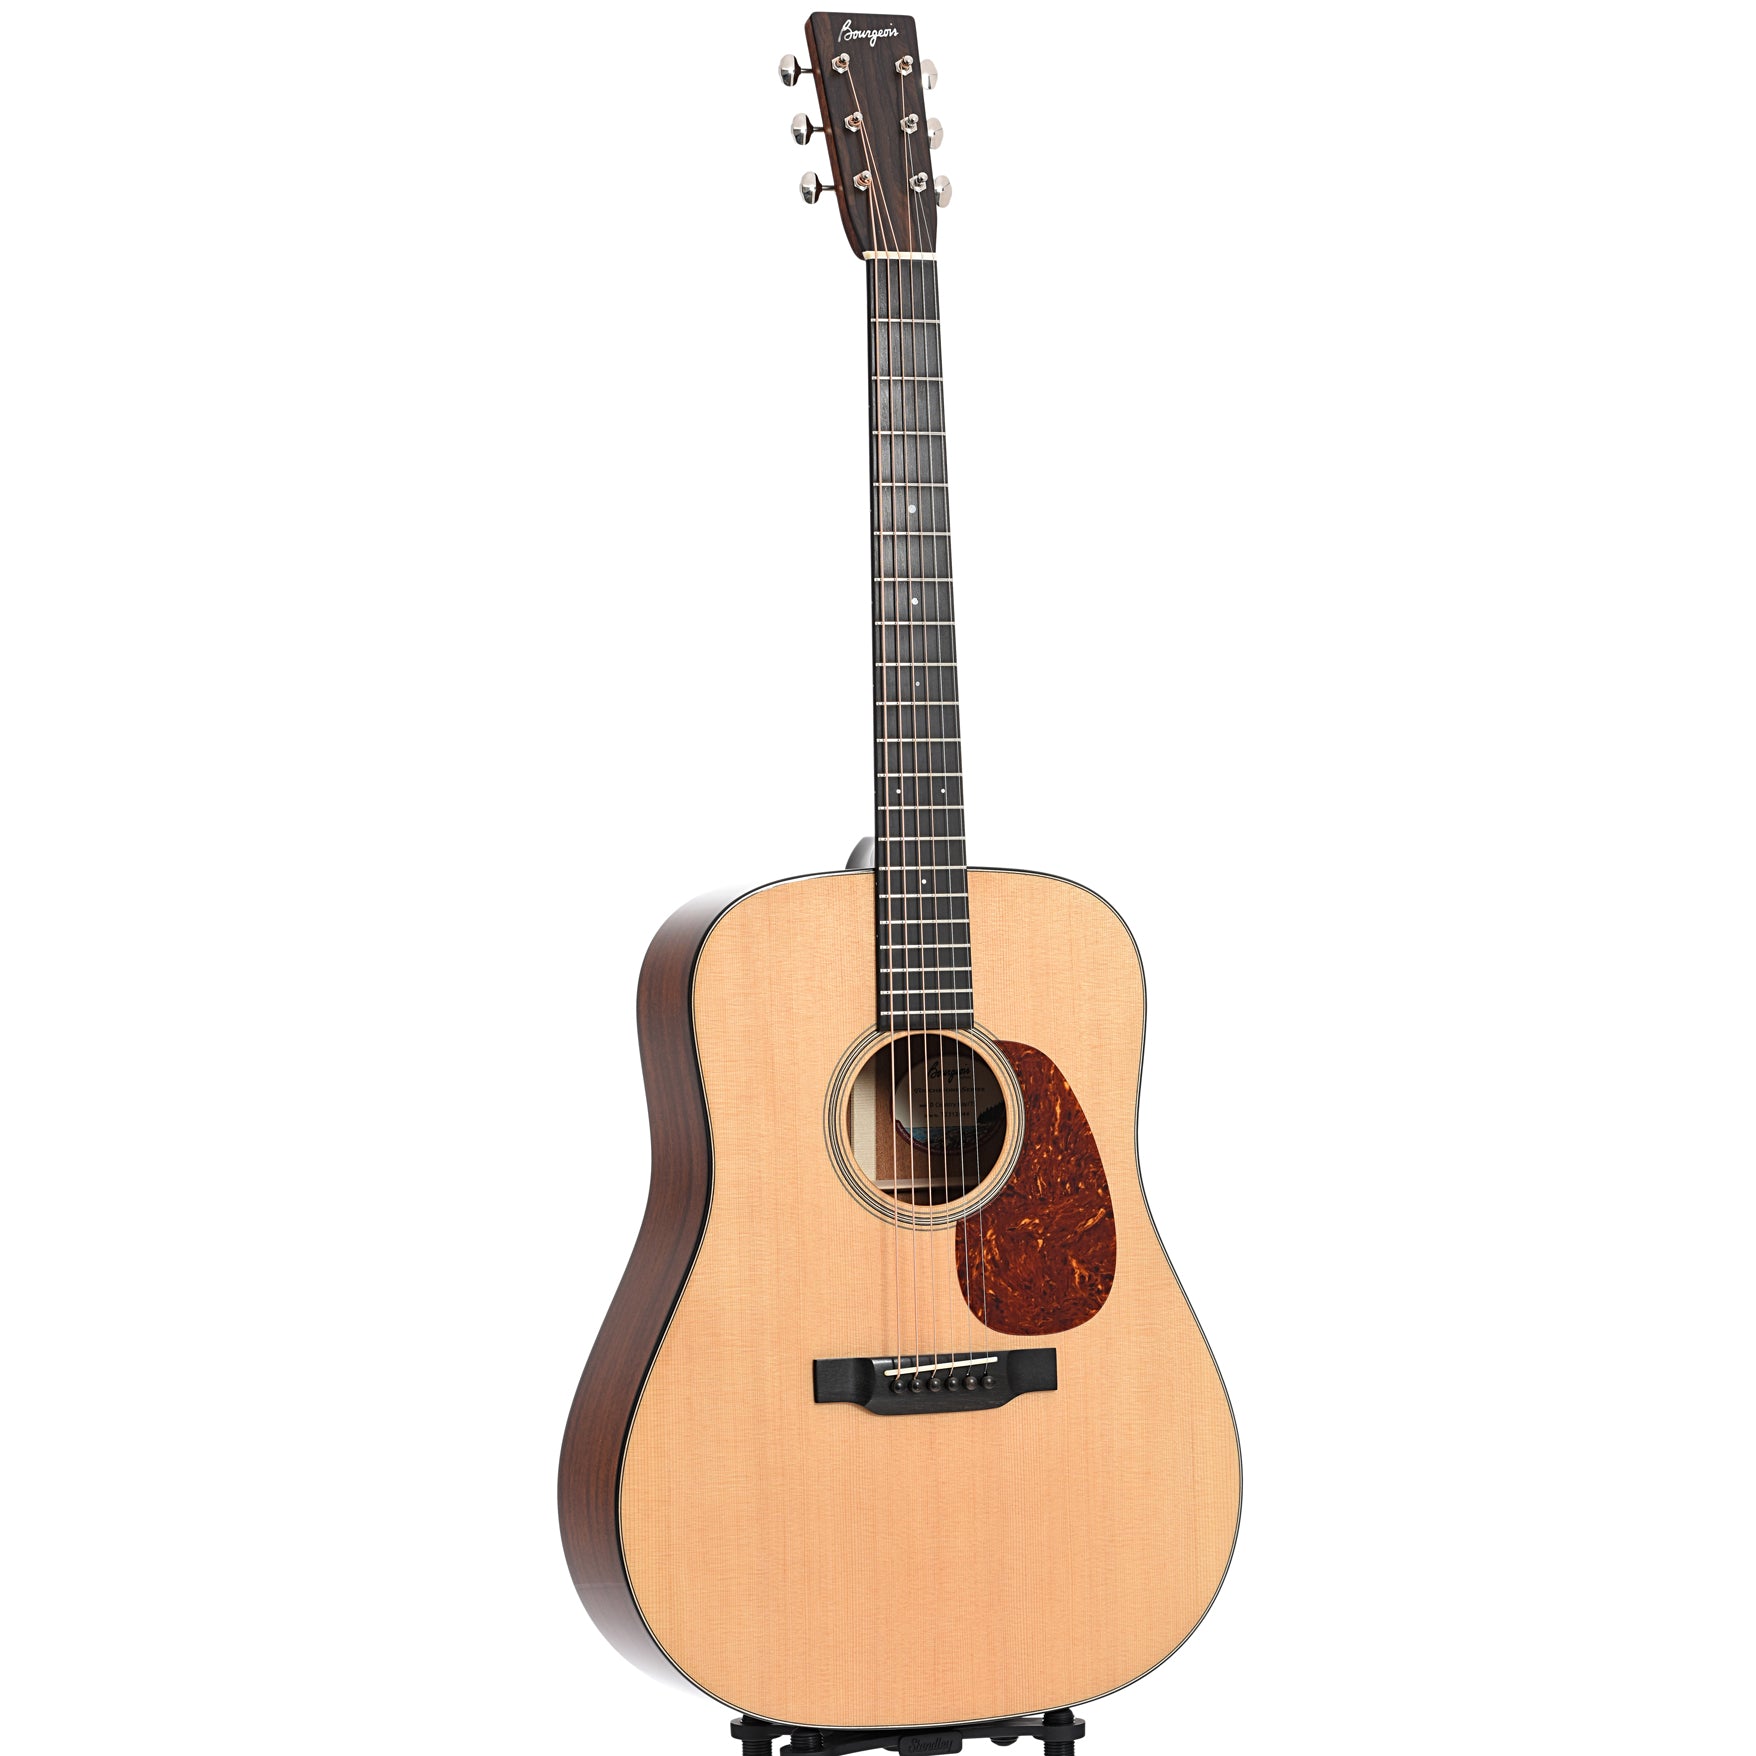 Full  front and side of Bourgeois Touchstone Series Country Boy Dreadnought Acoustic Guitar